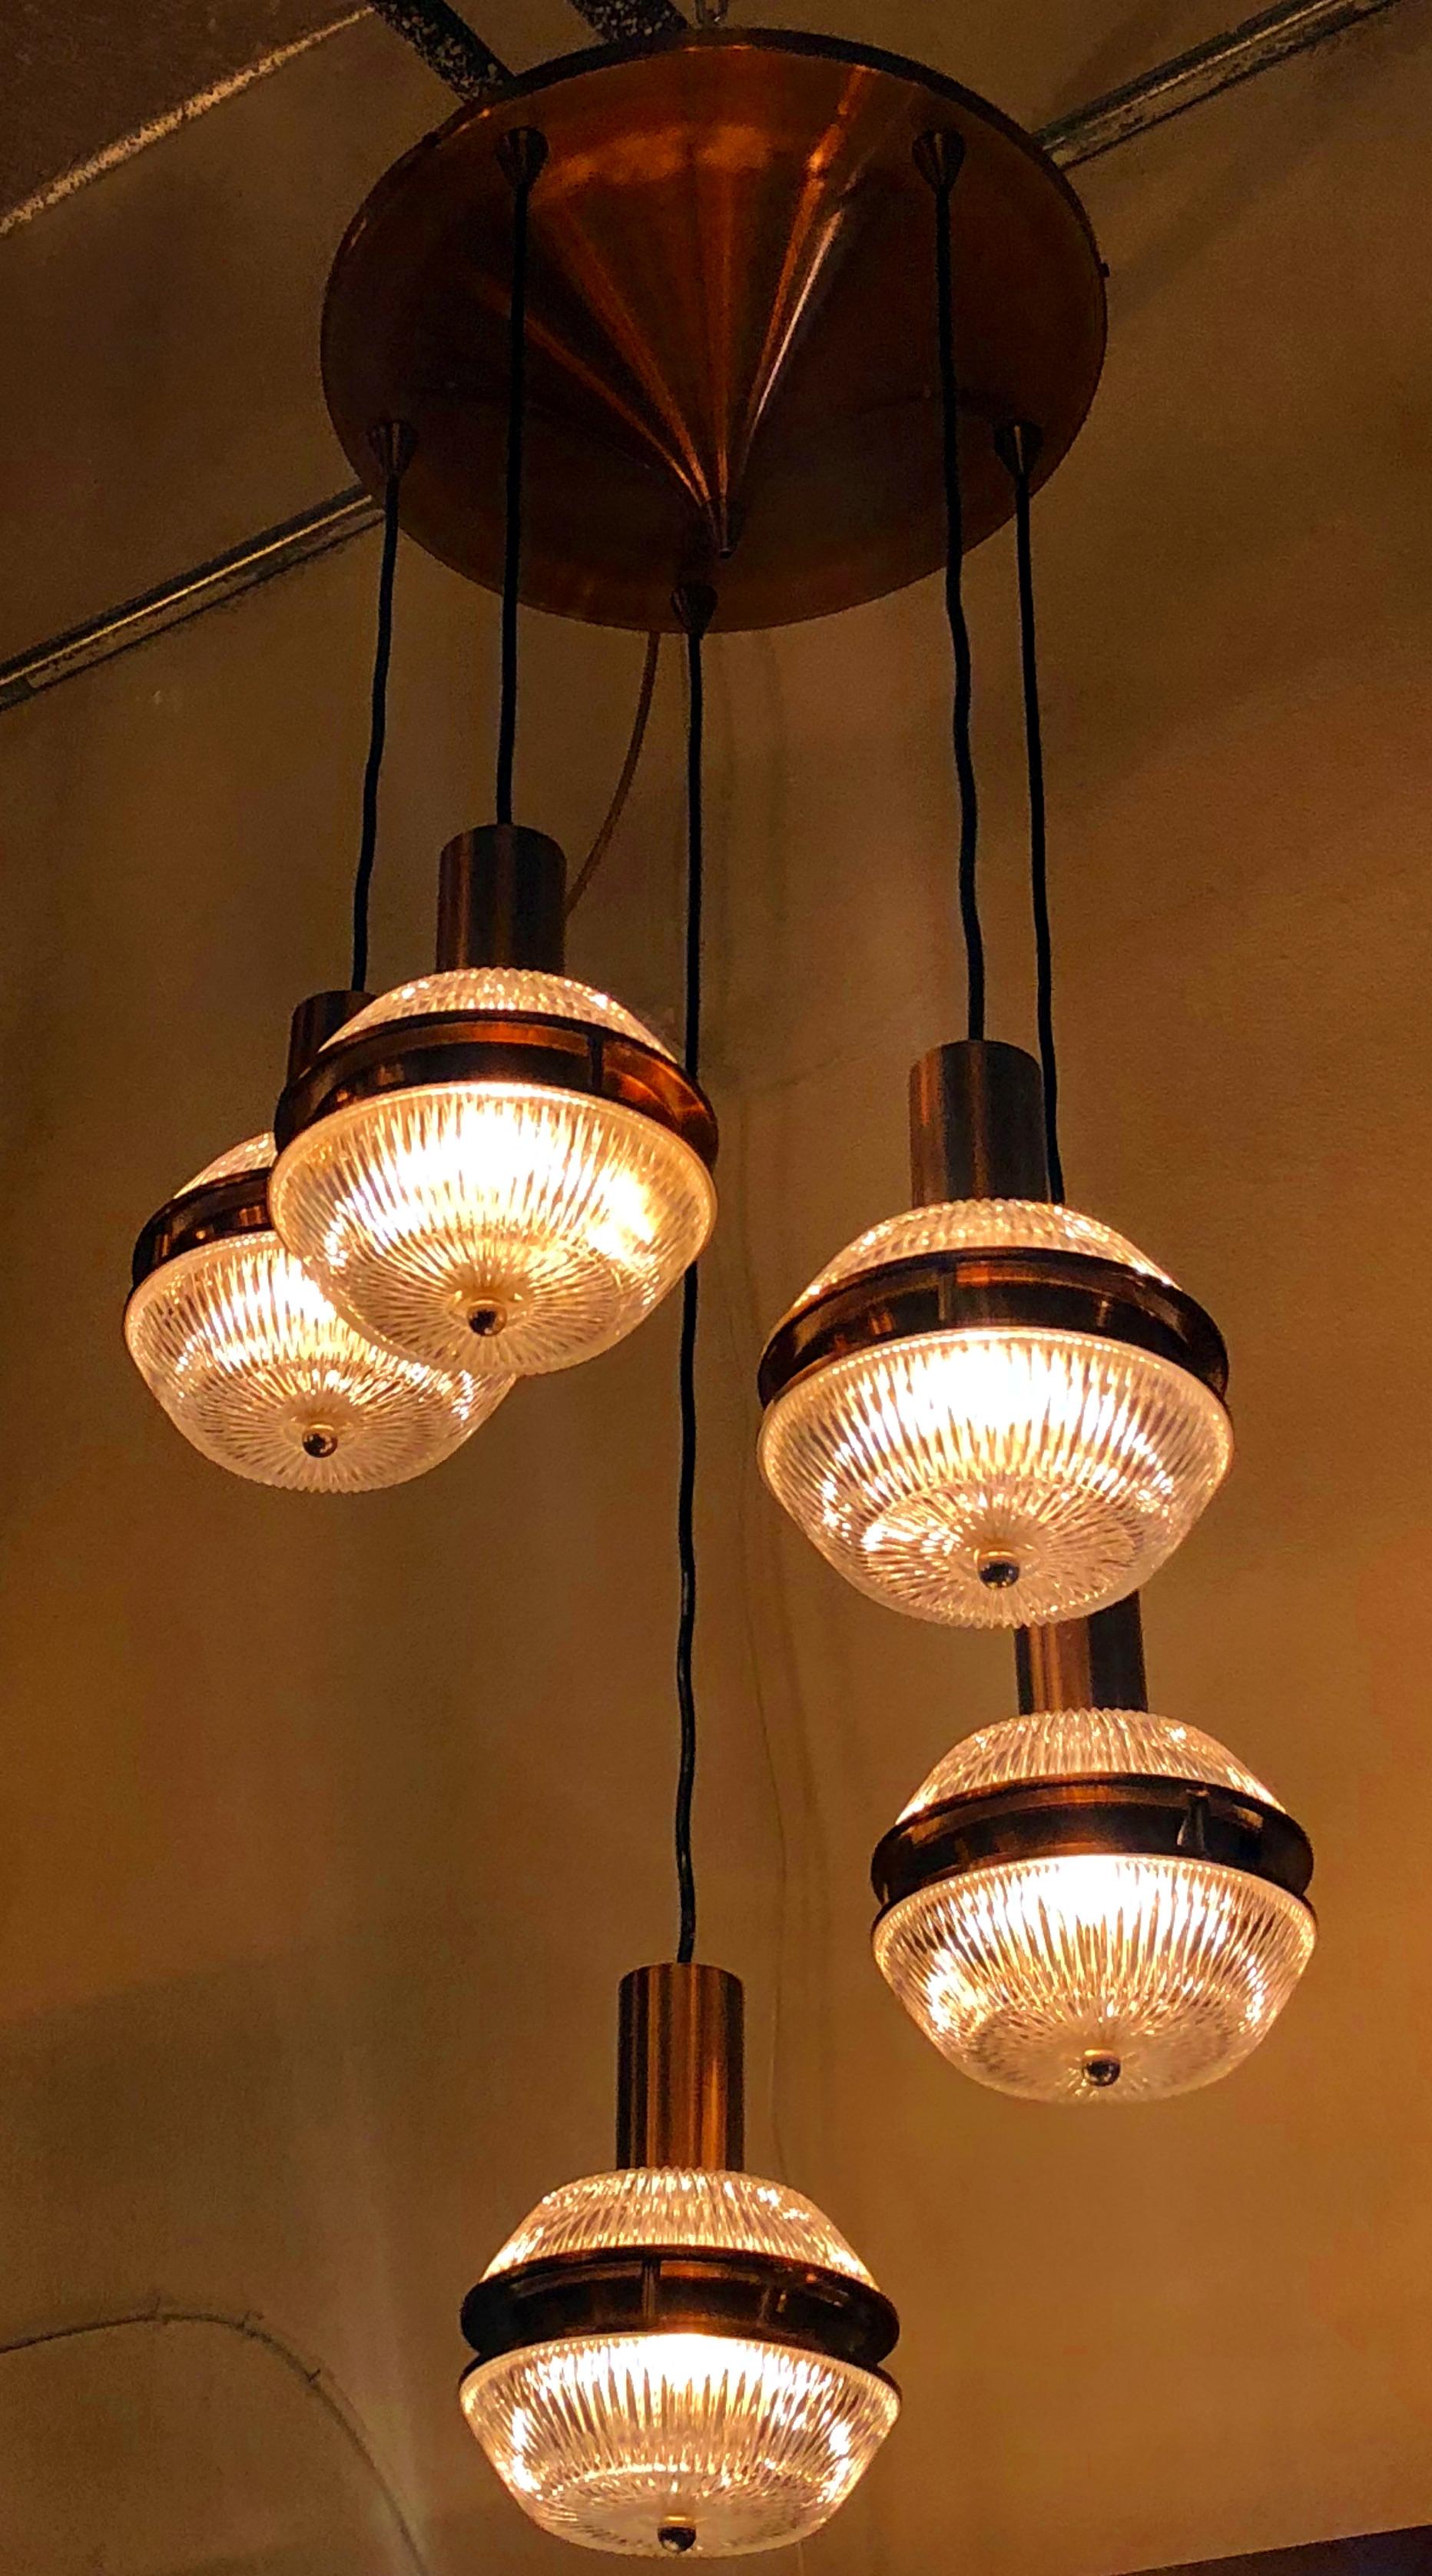 Original vintage Italian flush mount with height adjustable pendant lights made of beautiful textured glasses, mounted on polished bronzed metal finish / Designed by Stilnovo circa 1960’s / Made in Italy 
5 lights / E12 type / max 40W each
Overall